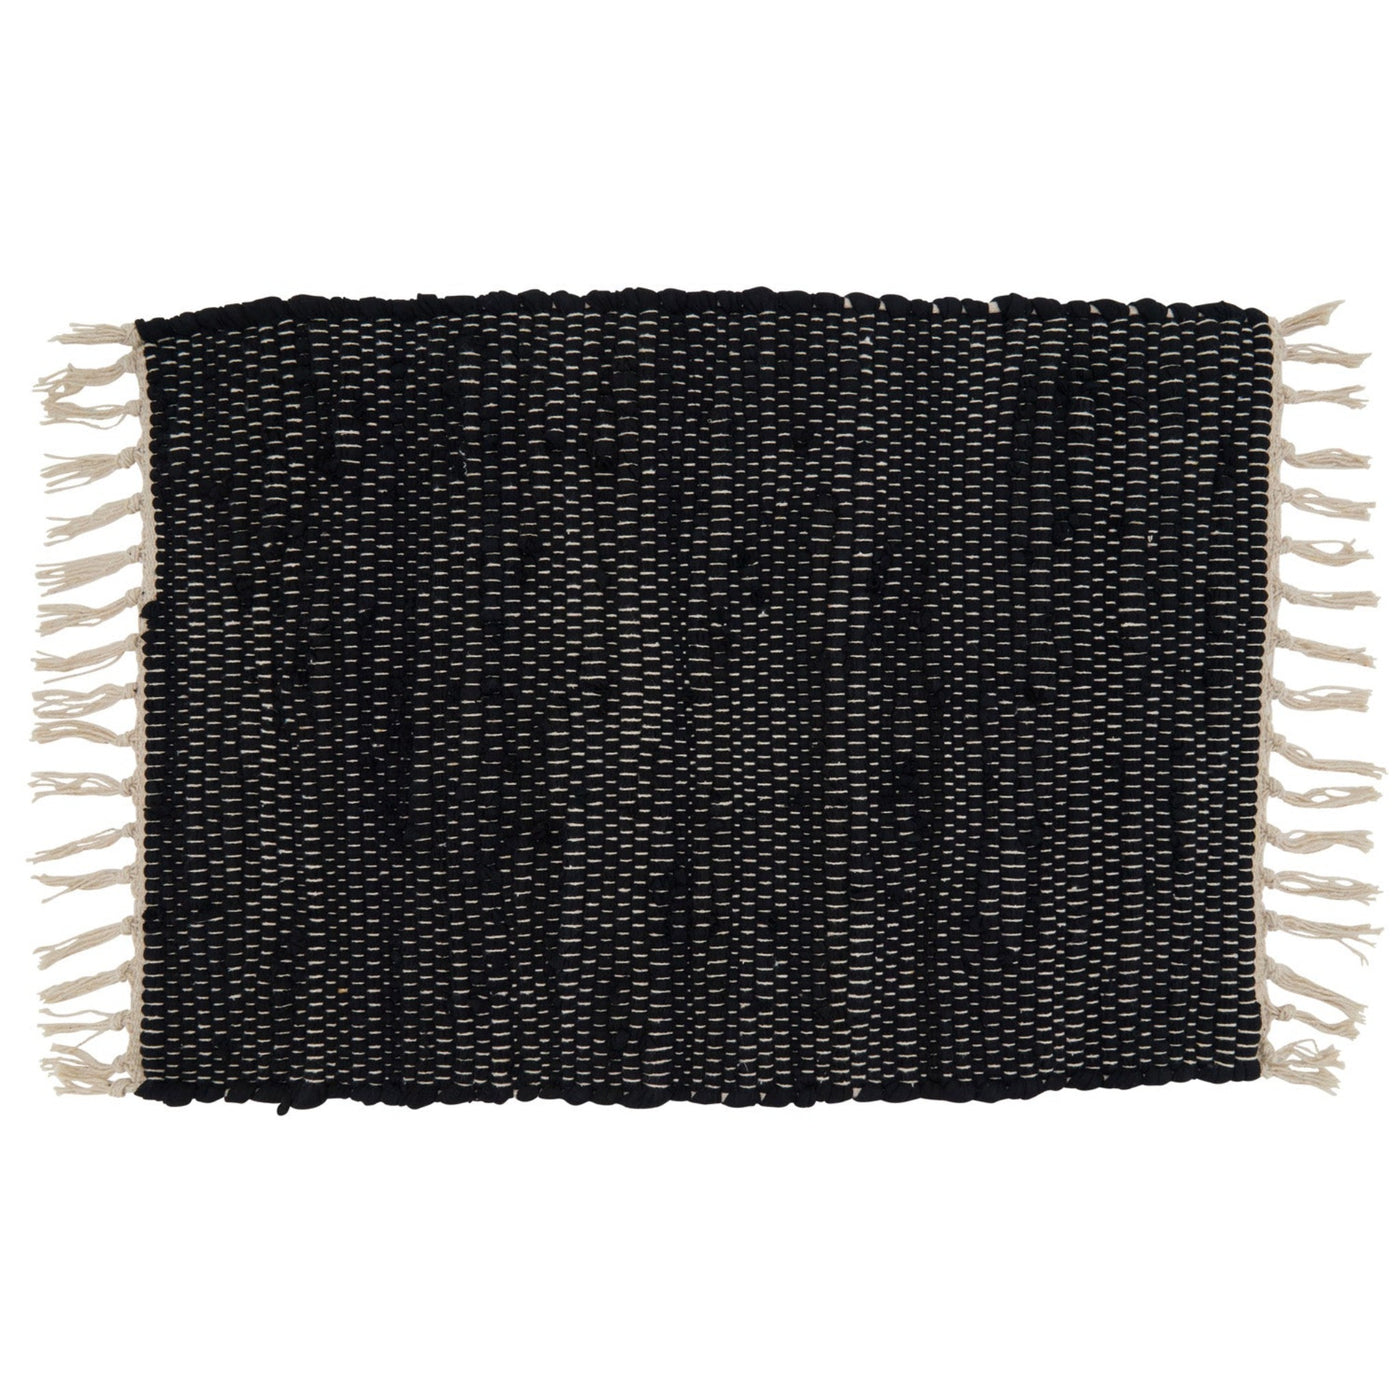 Black Woven Fringed Placemat